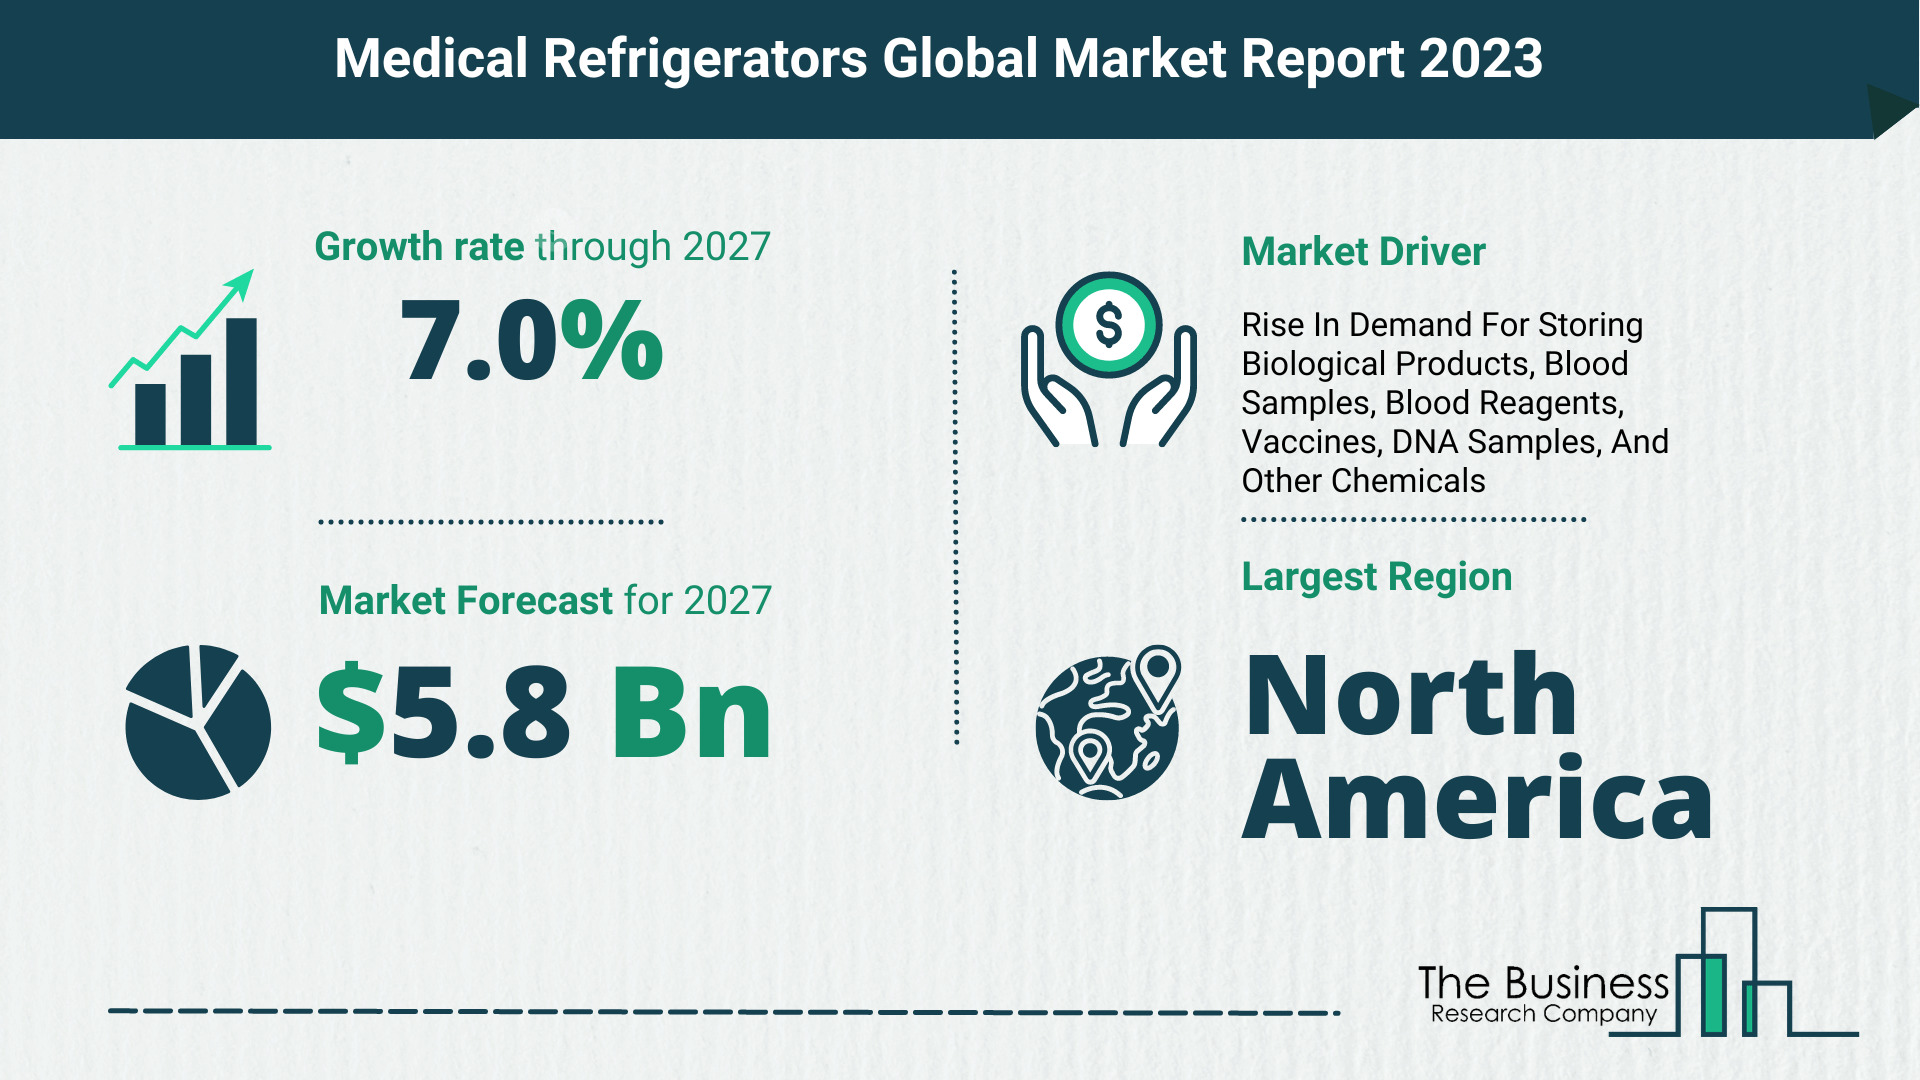 Medical Refrigerators Market Size, Share, And Growth Rate Analysis 2023